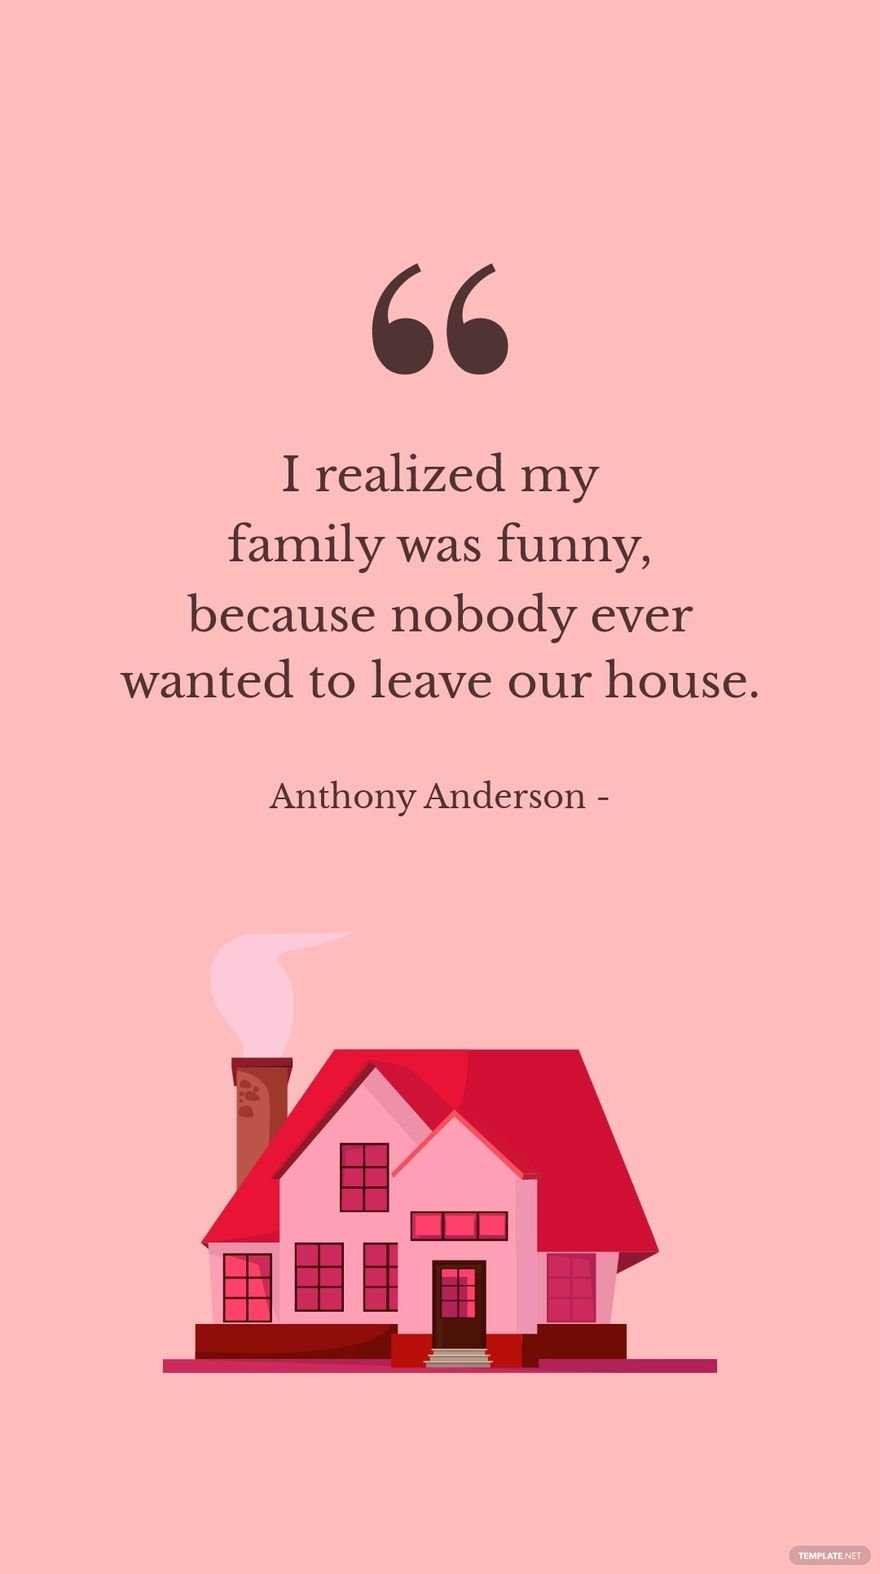 Anthony Anderson - I realized my family was funny, because nobody ever wanted to leave our house.